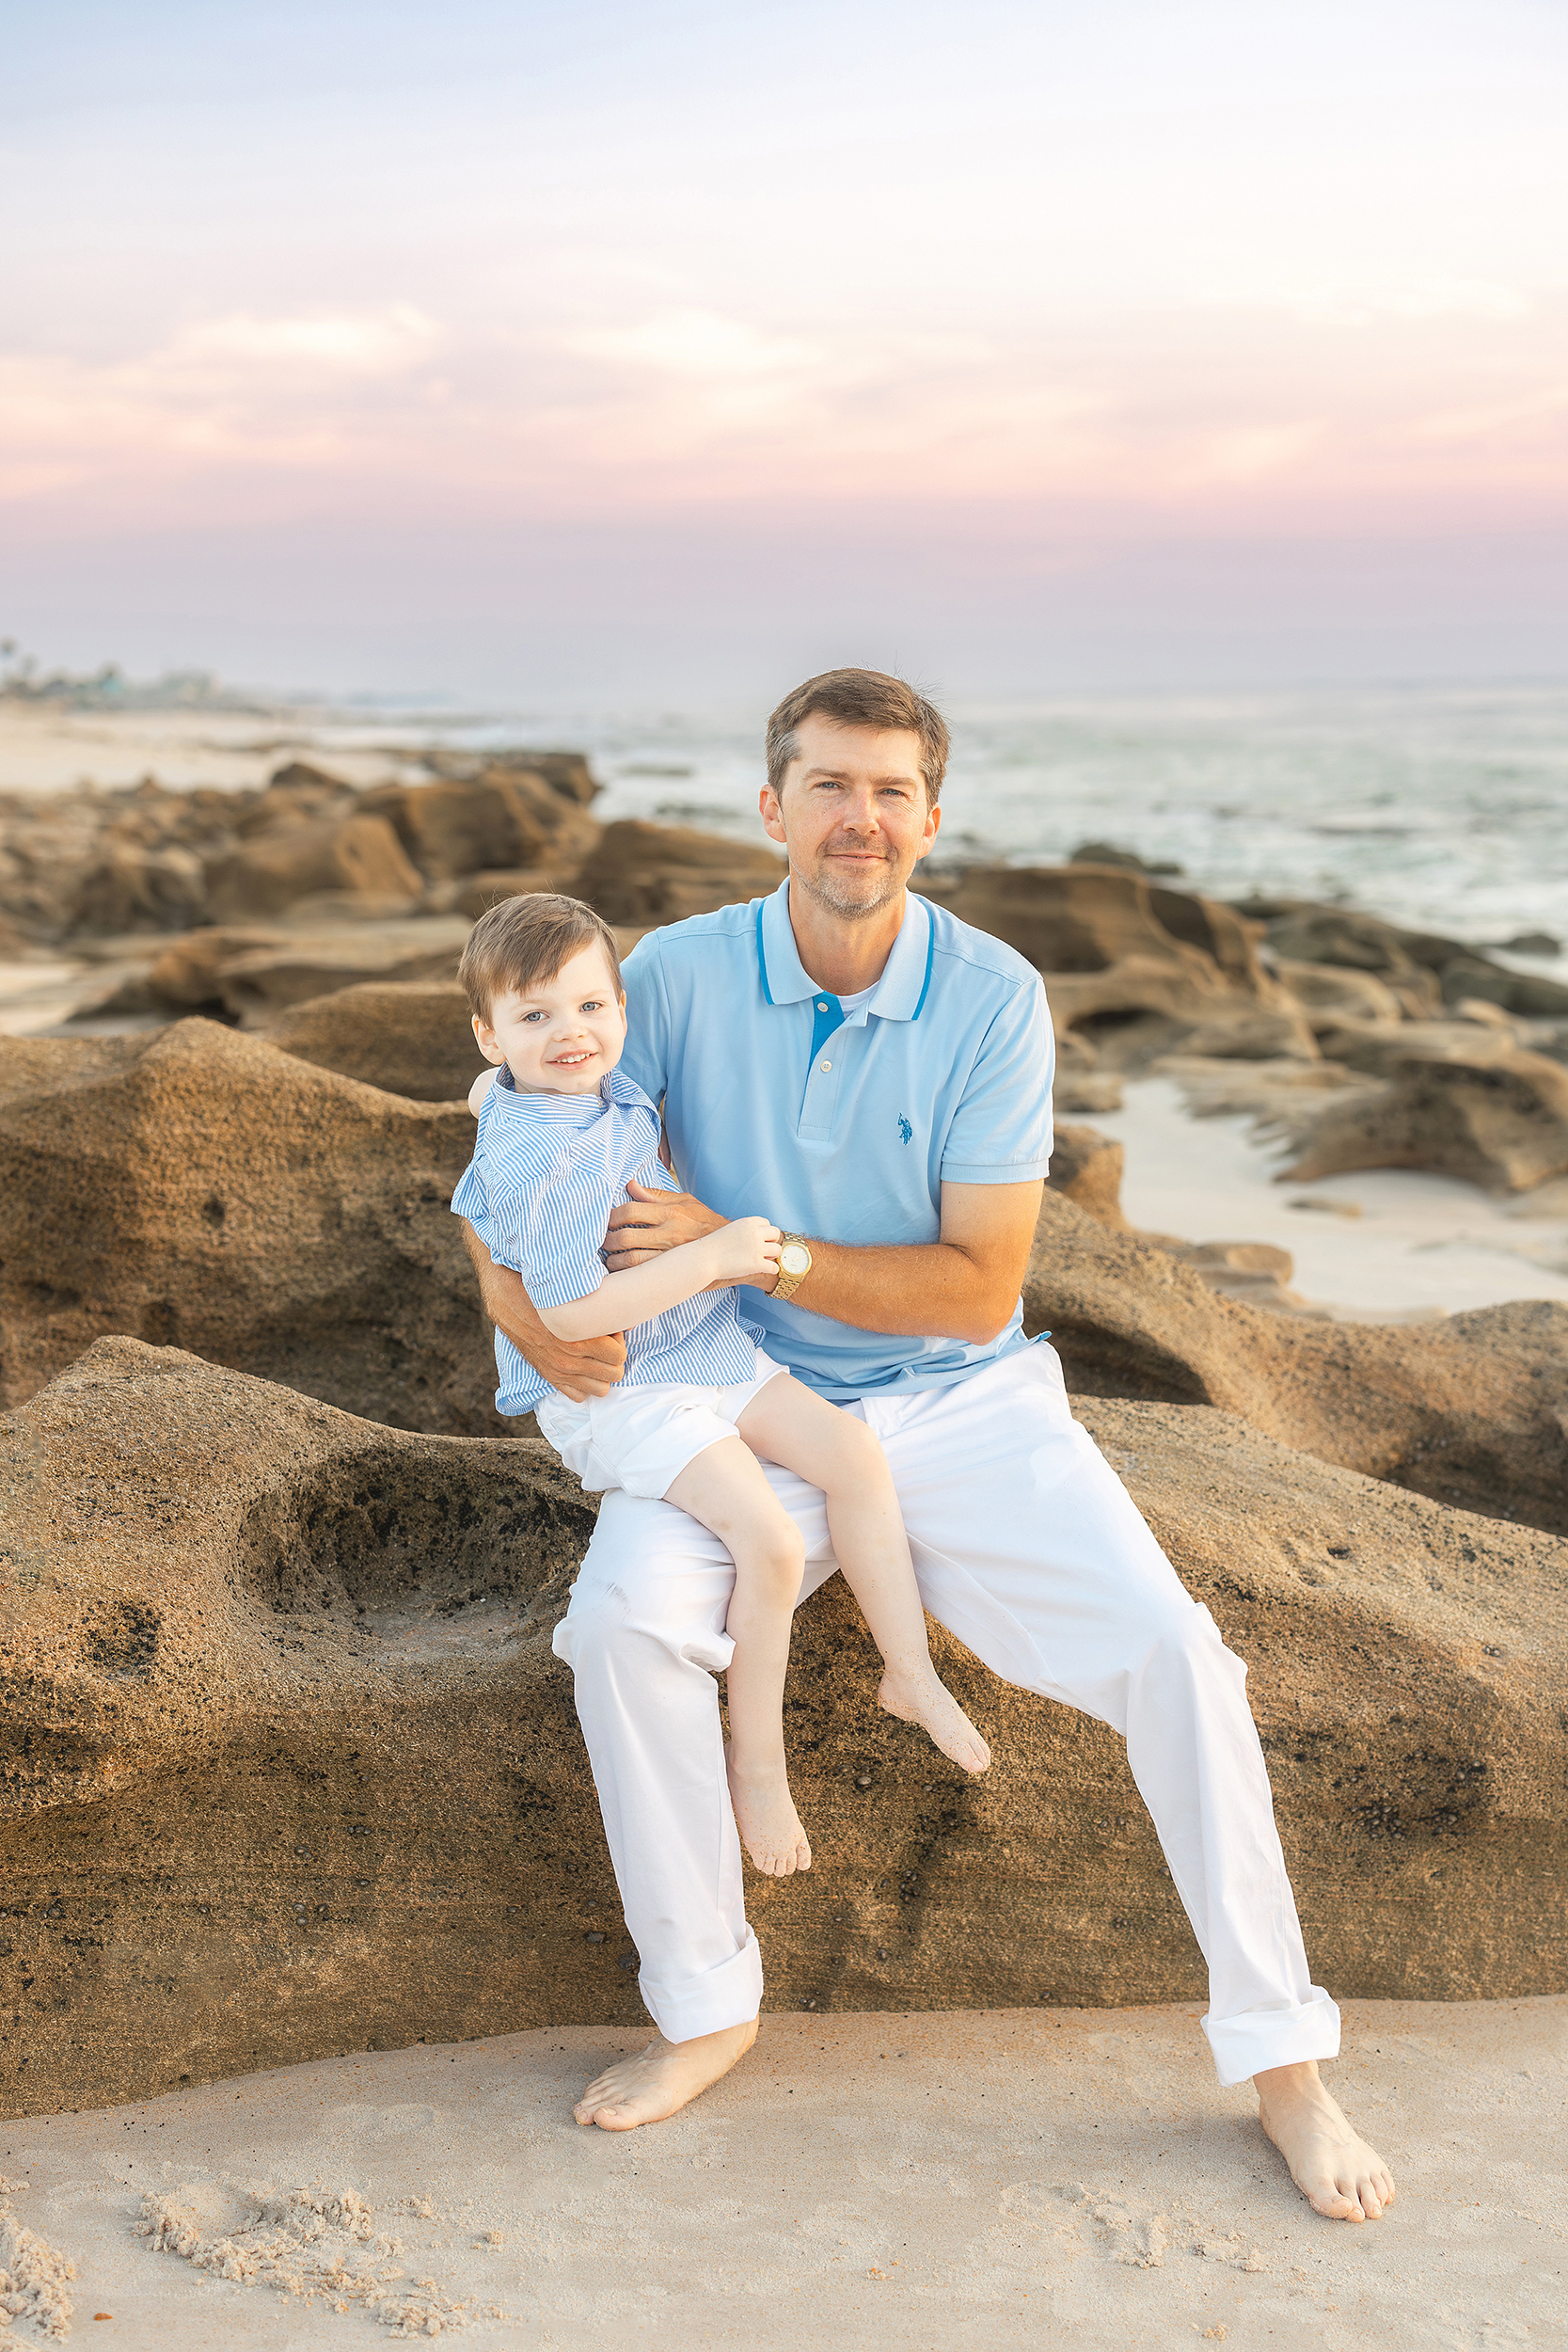 A beach portrait of a father and his son captured by Saint Augustine family photographer, Rya Duncklee of Ryaphotos